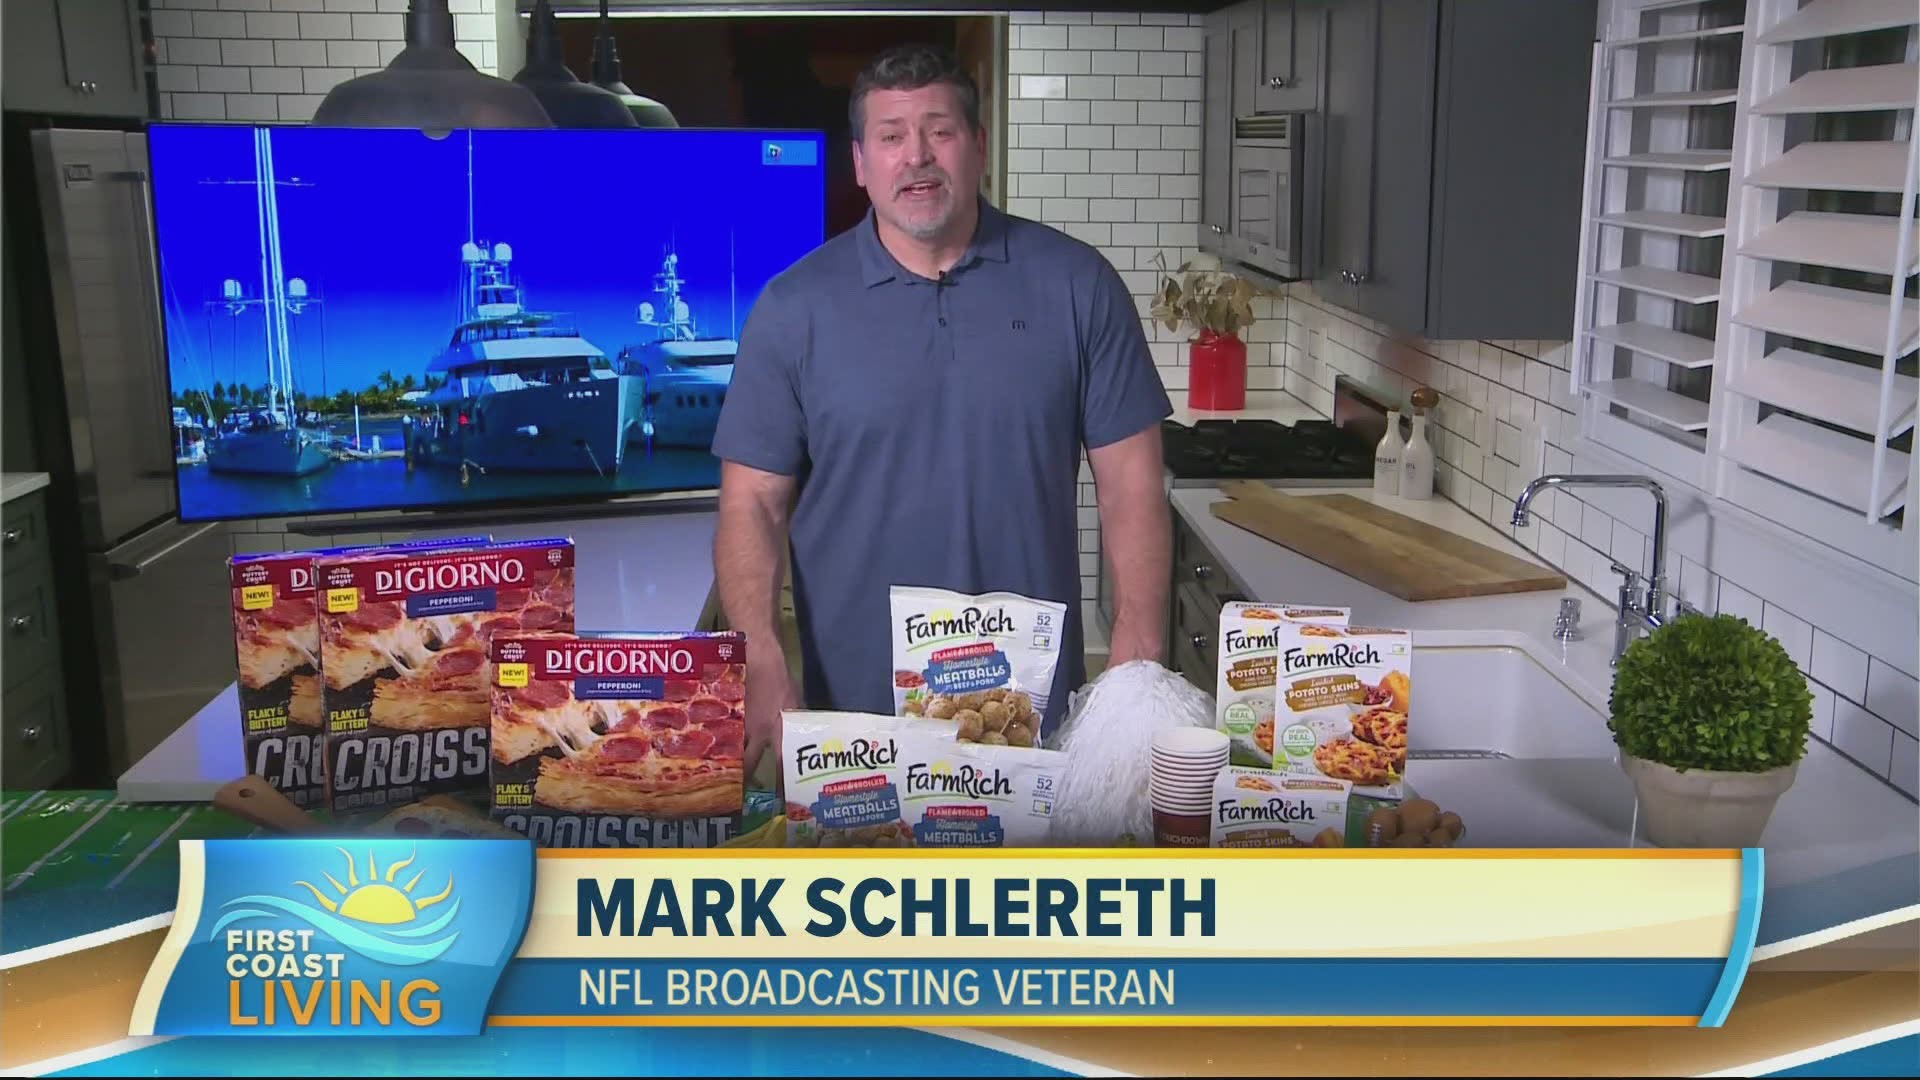 3-Time Super Bowl Champion & NFL Broadcasting Veteran Mark Schlereth Shares his Play by Play for the Big Game Day